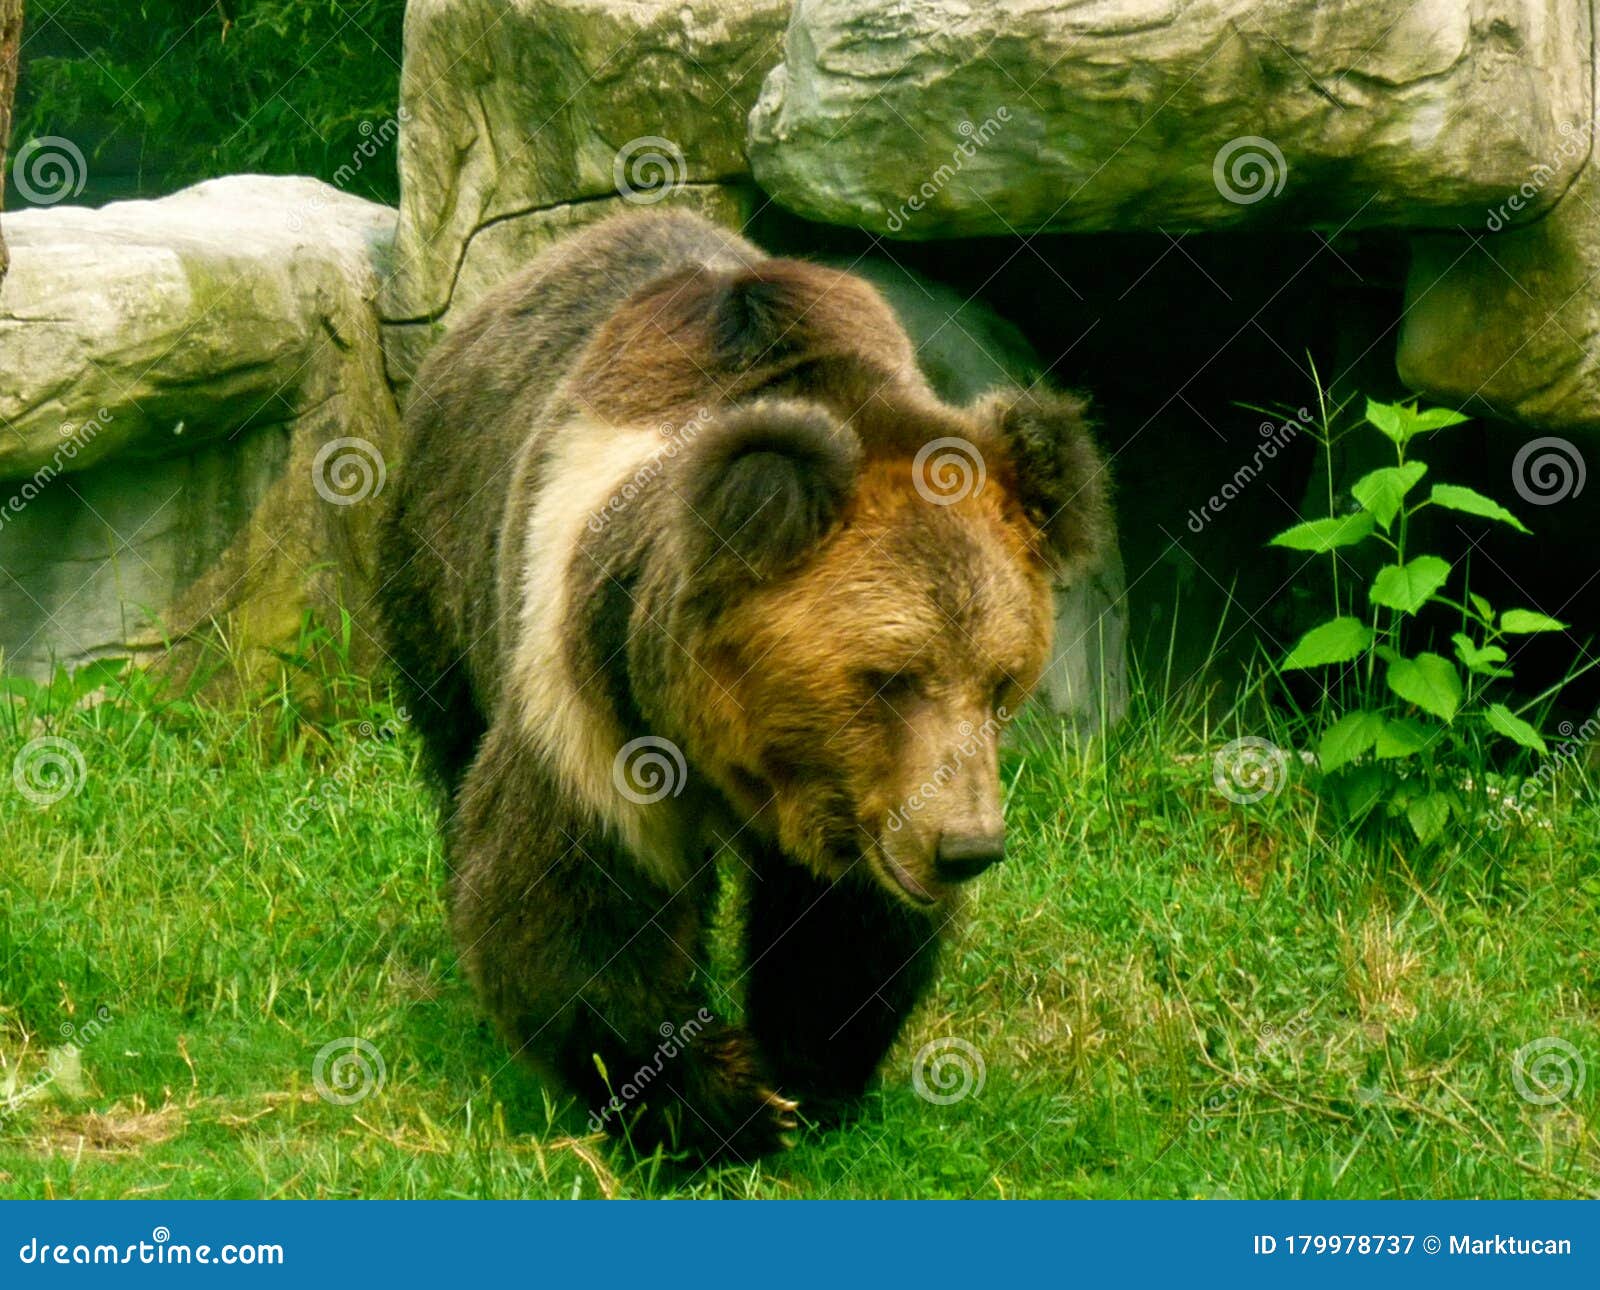 brown bear in the animals asia rescue centre near chengdu, china